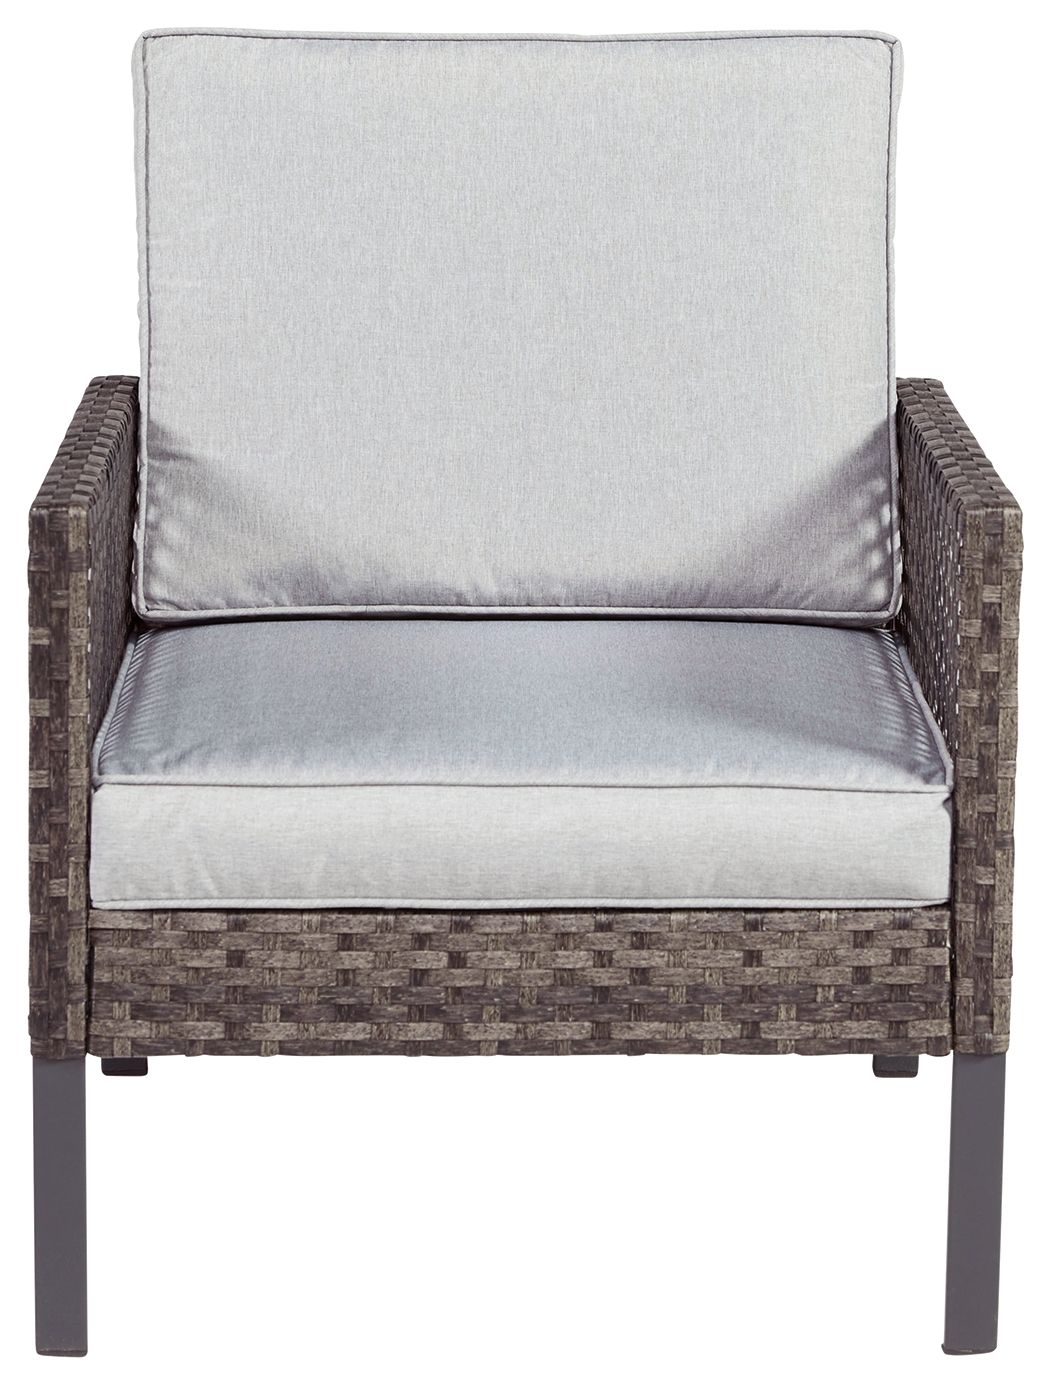 Lainey - Two-tone Gray - Love/Chairs/Table Set (Set of 4)